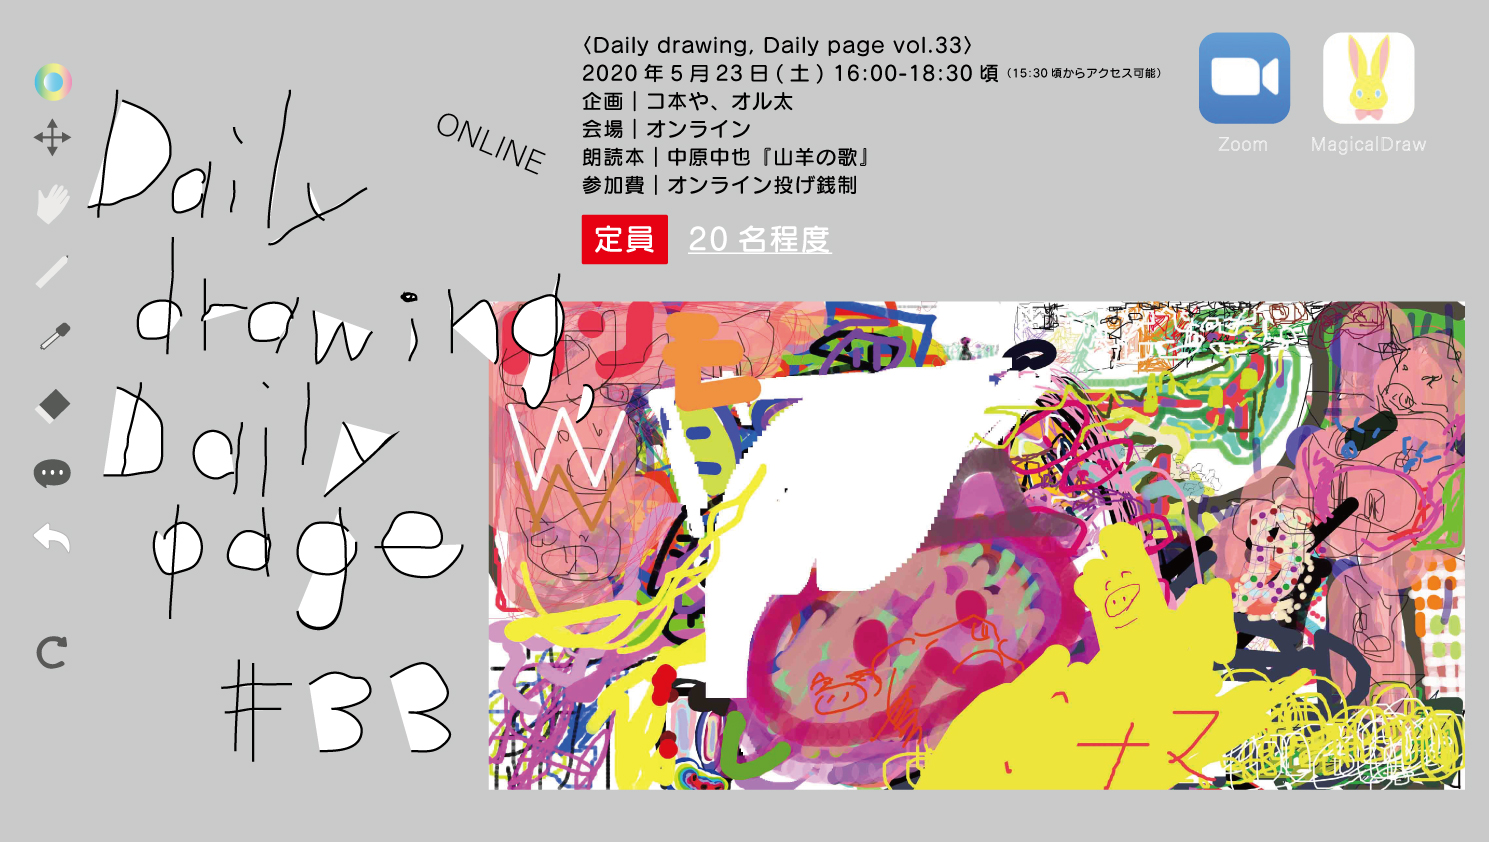 ［ONLINE!］オル太＋コ本や共同企画〈Daily drawing, Daily page vol.33〉「山羊の歌」